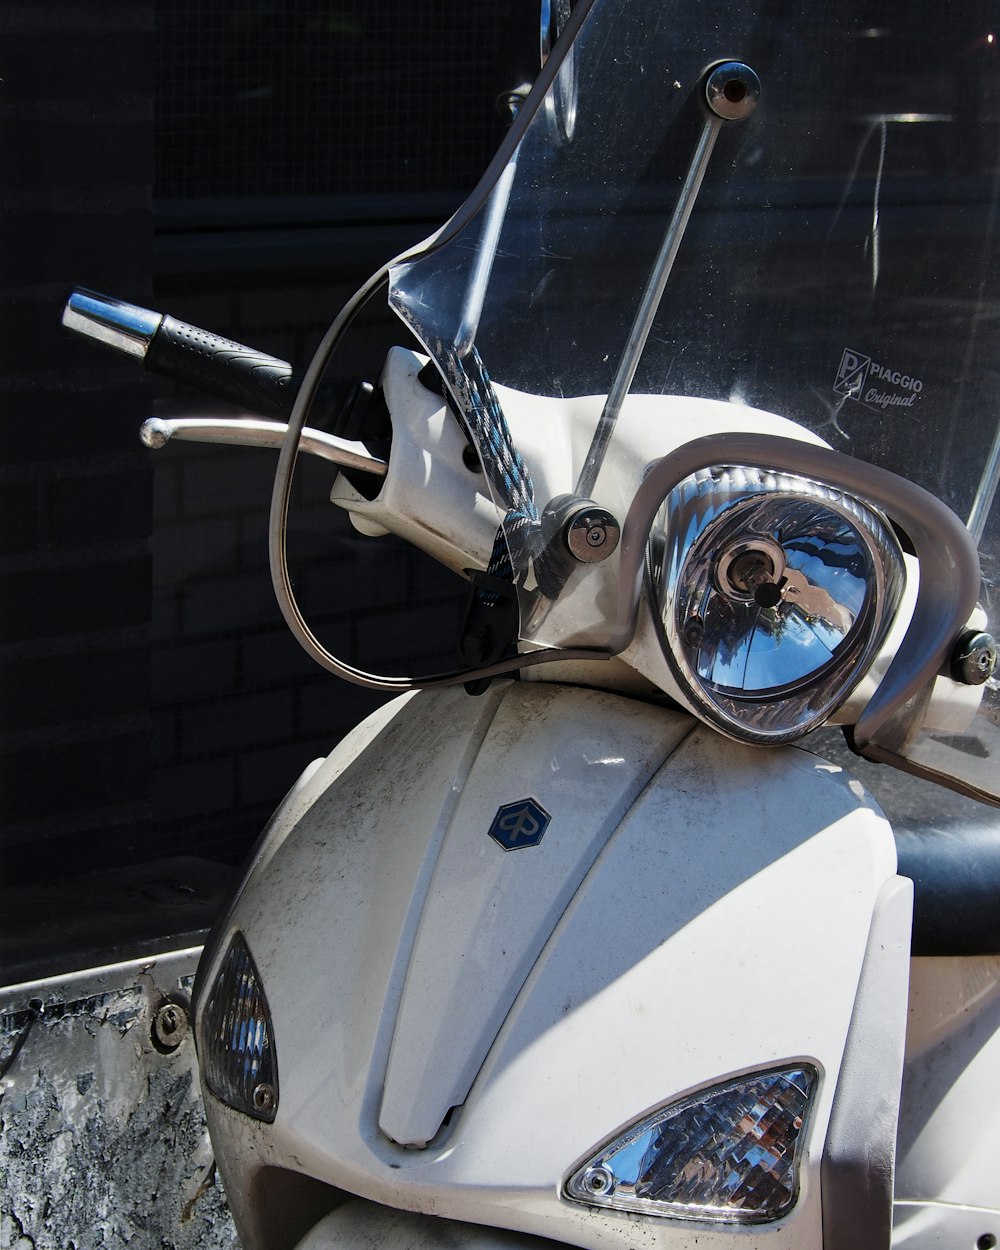 a close up of a motorcycle with a mirror on it